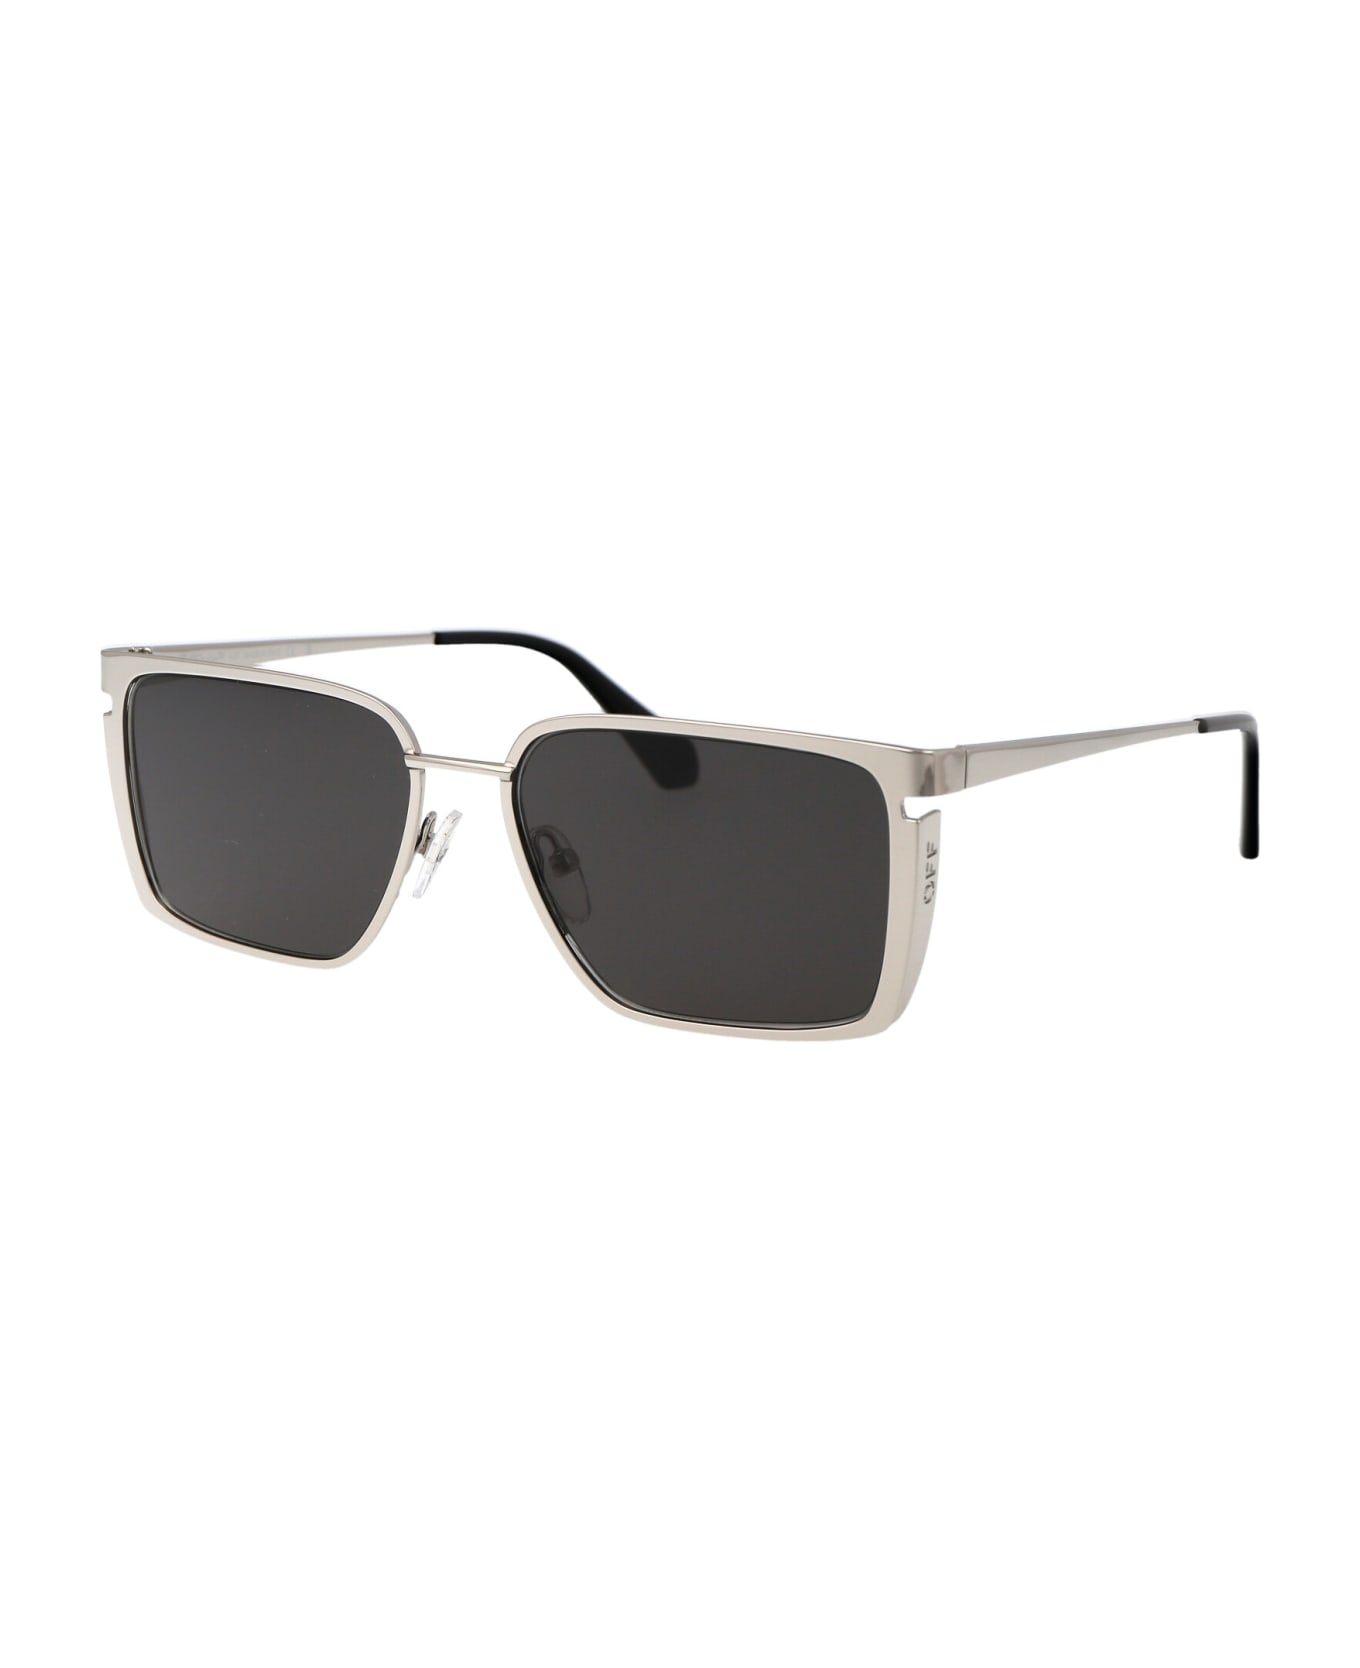 Off-White Yoder Sunglasses - 7207 SILVER サングラス